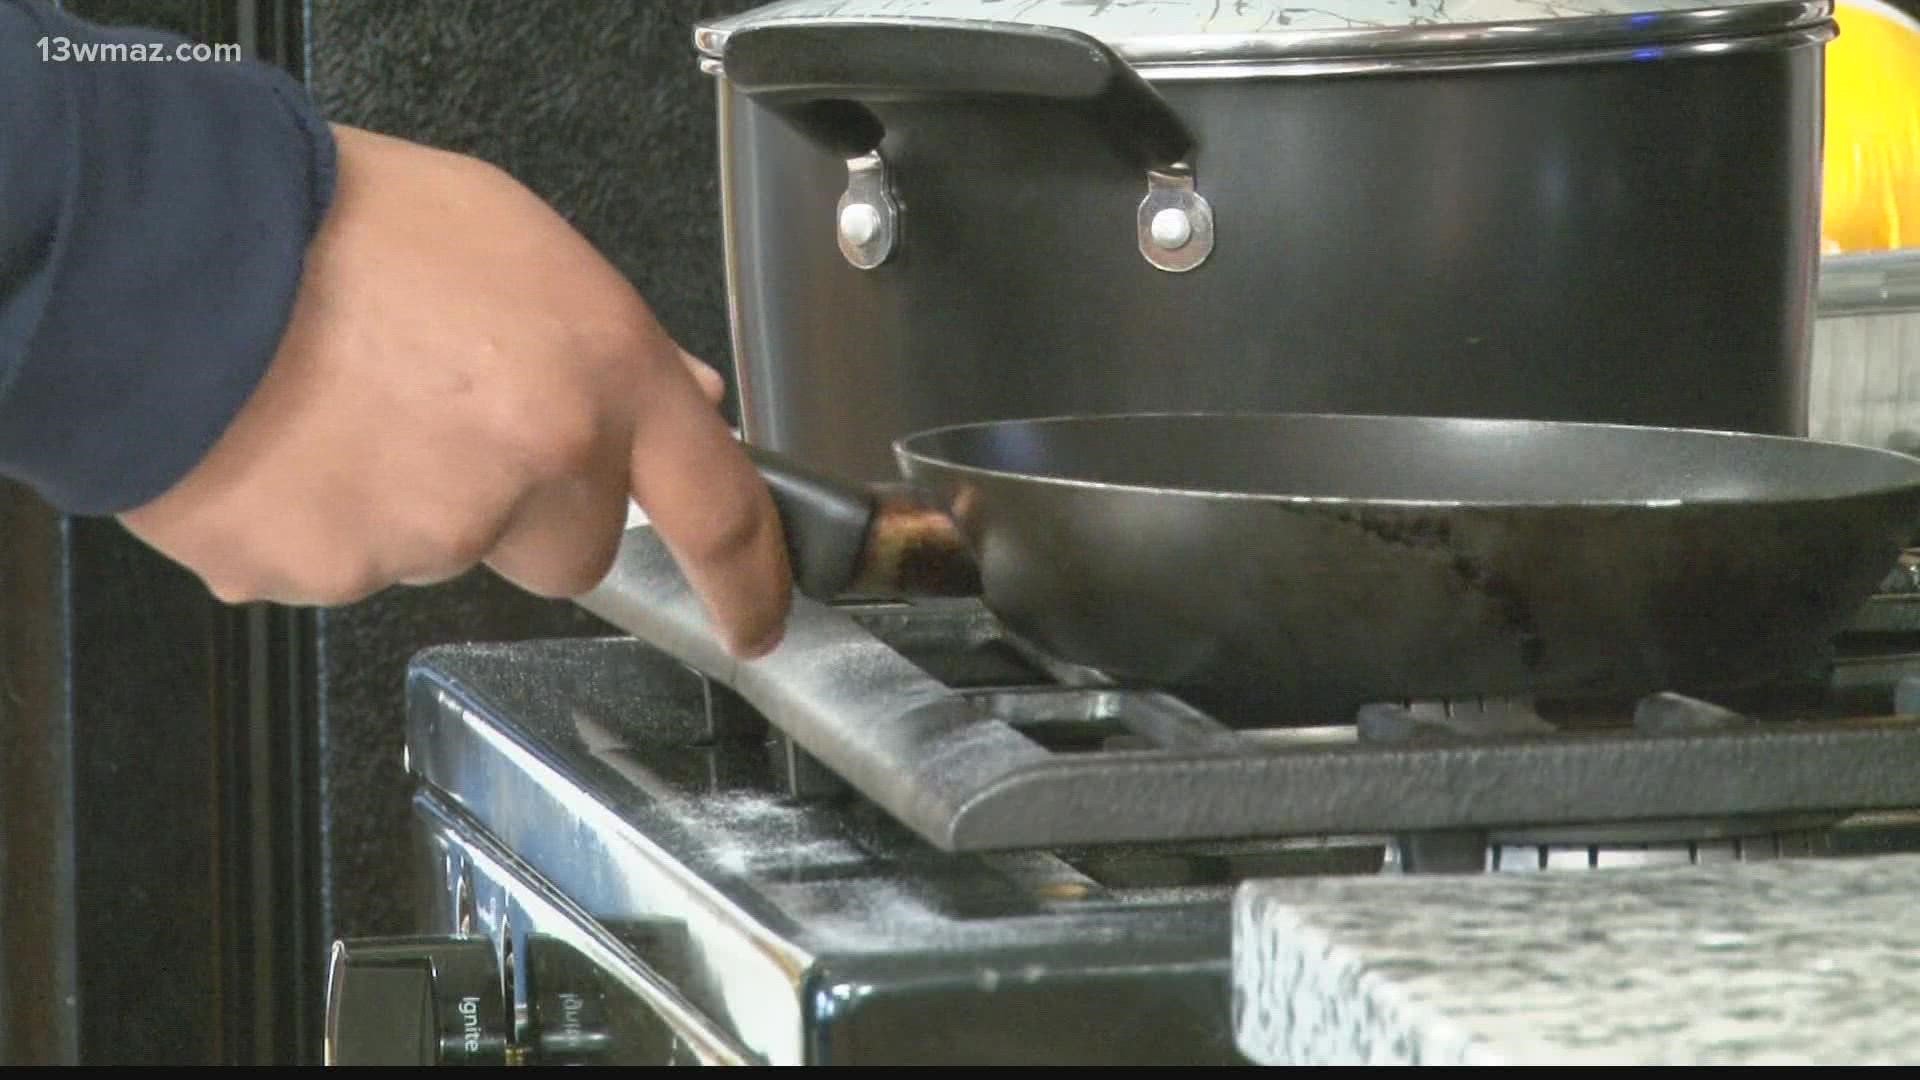 Between cooking and talking with family members, an accident could happen in the blink of an eye. The Milledgeville Fire Department gives tips on how to cook safely.